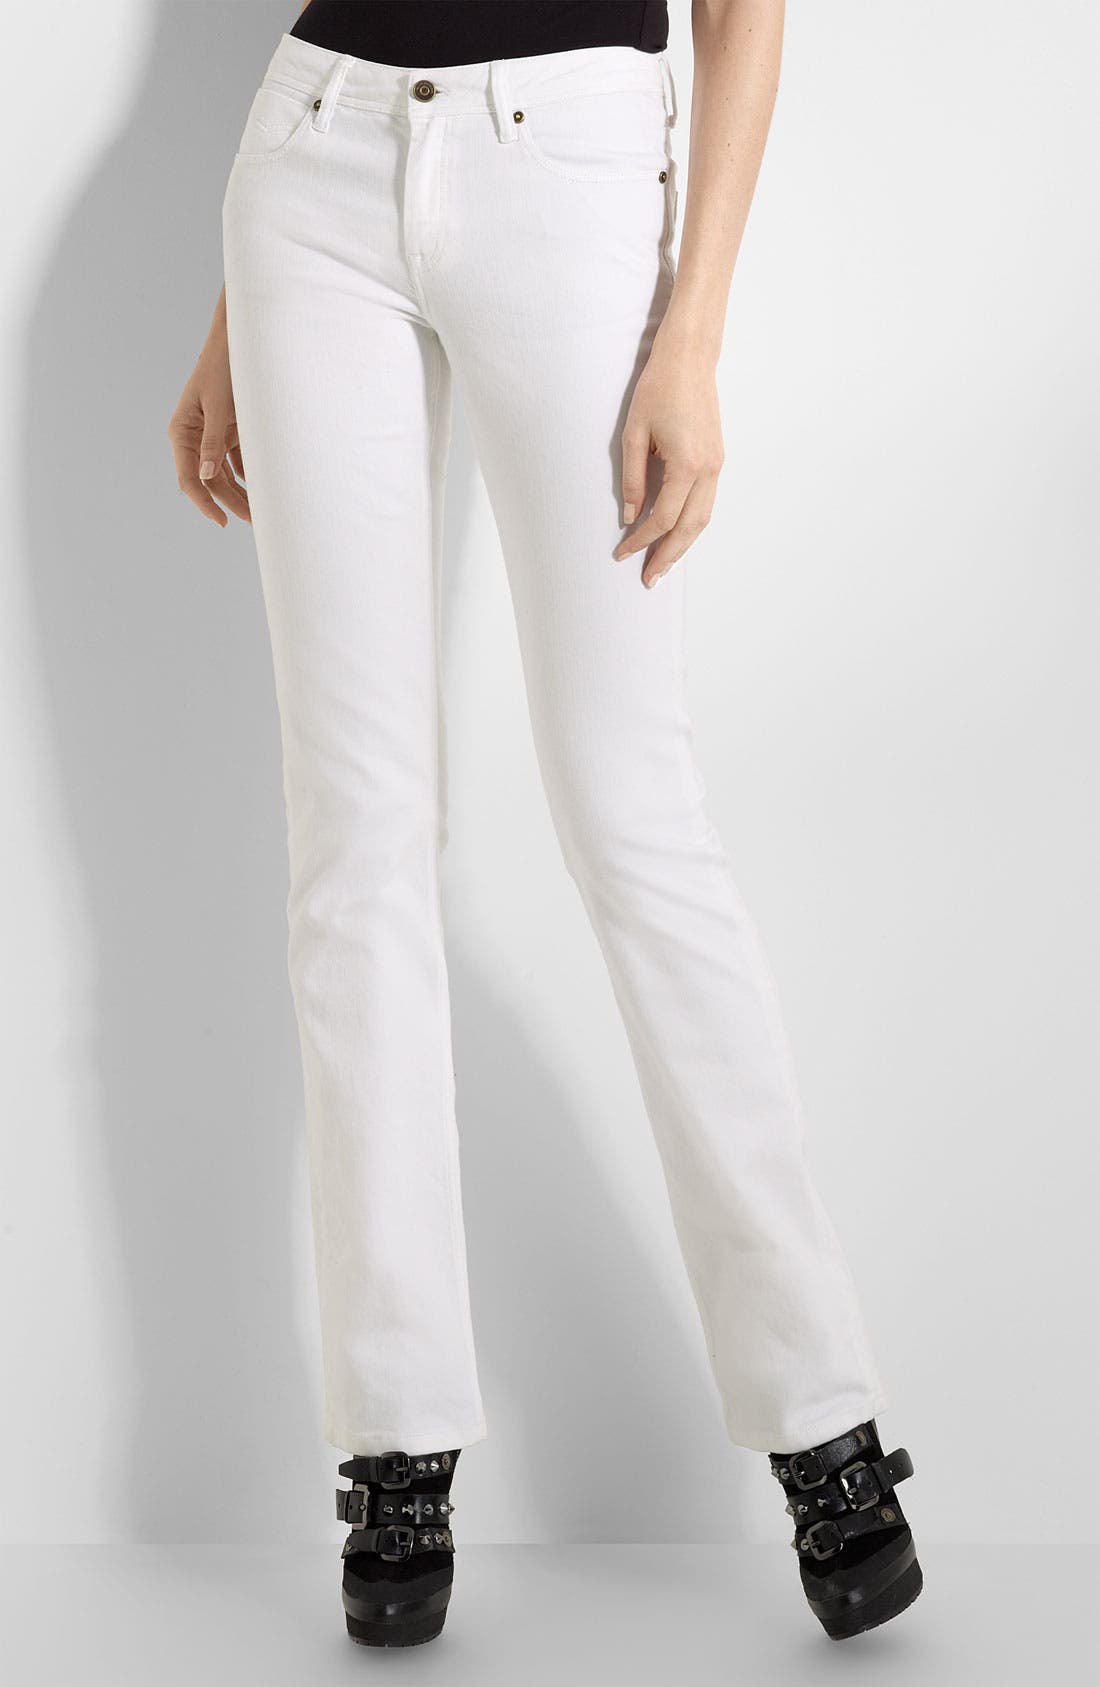 burberry jeans white